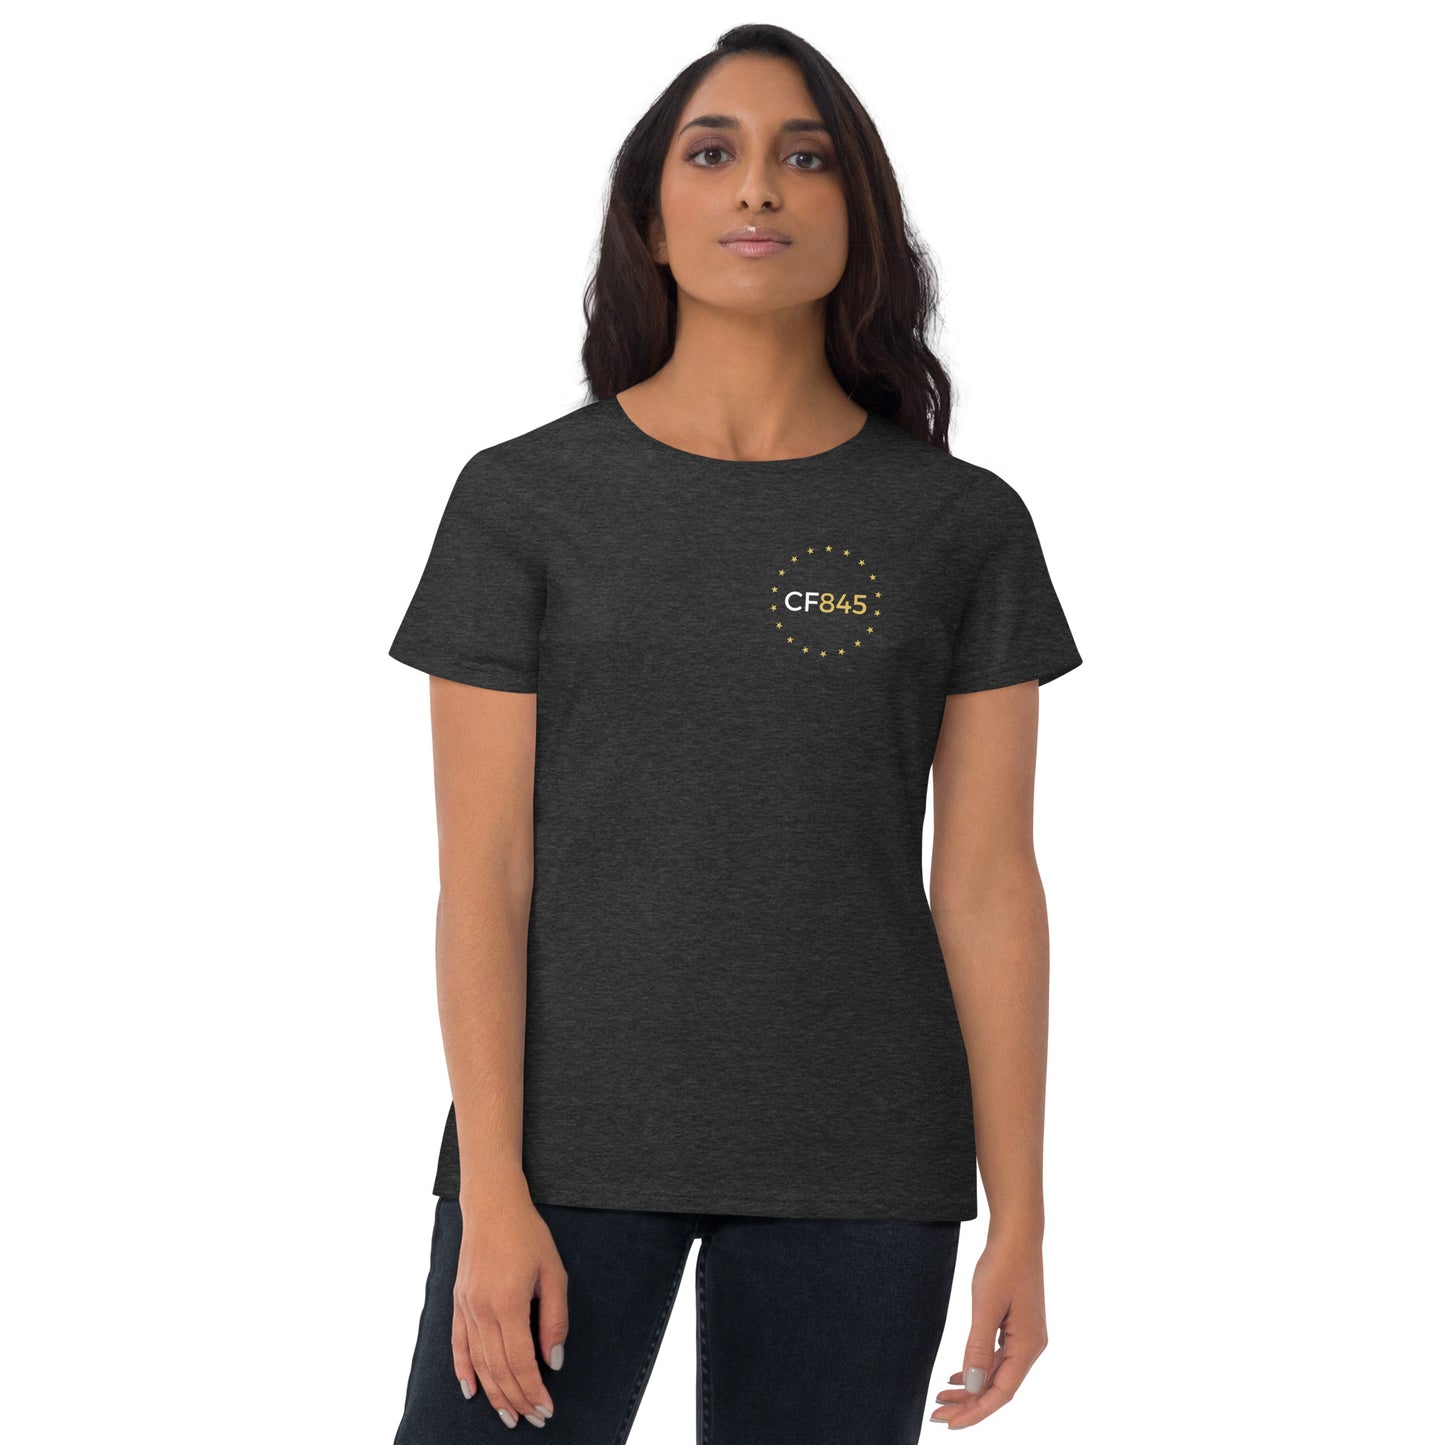 Limited Edition Women's 10-Year Member Tee